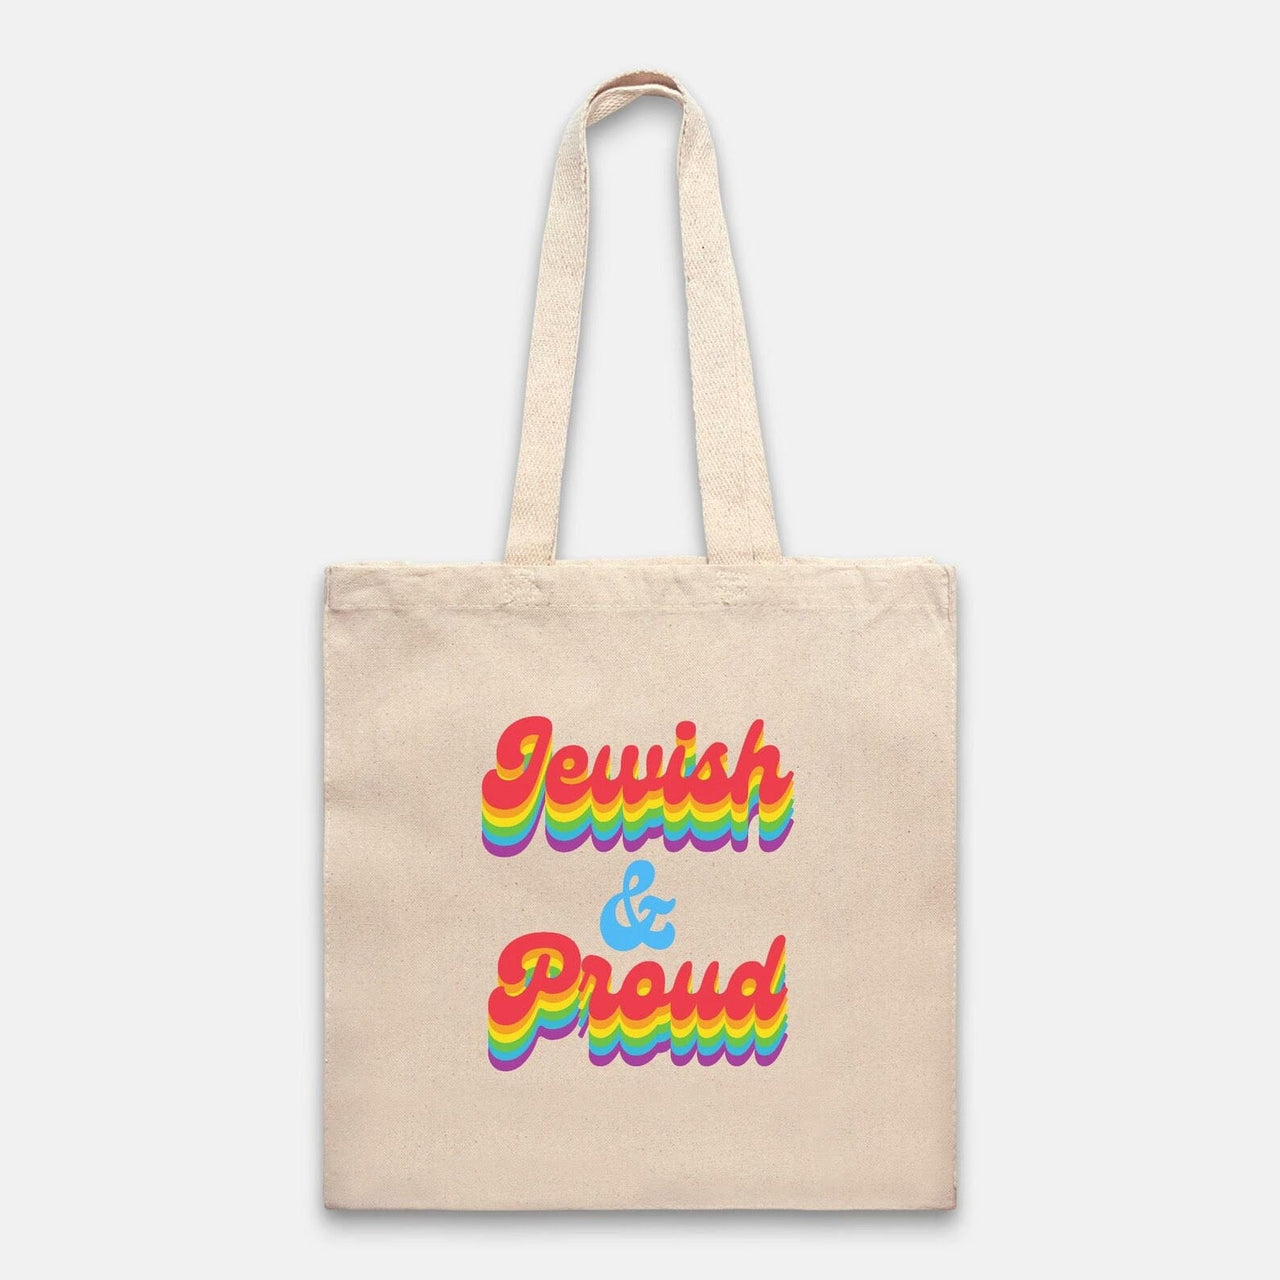 Midrash Manicures Tote Bags & Cases Jewish and Proud Tote Bag